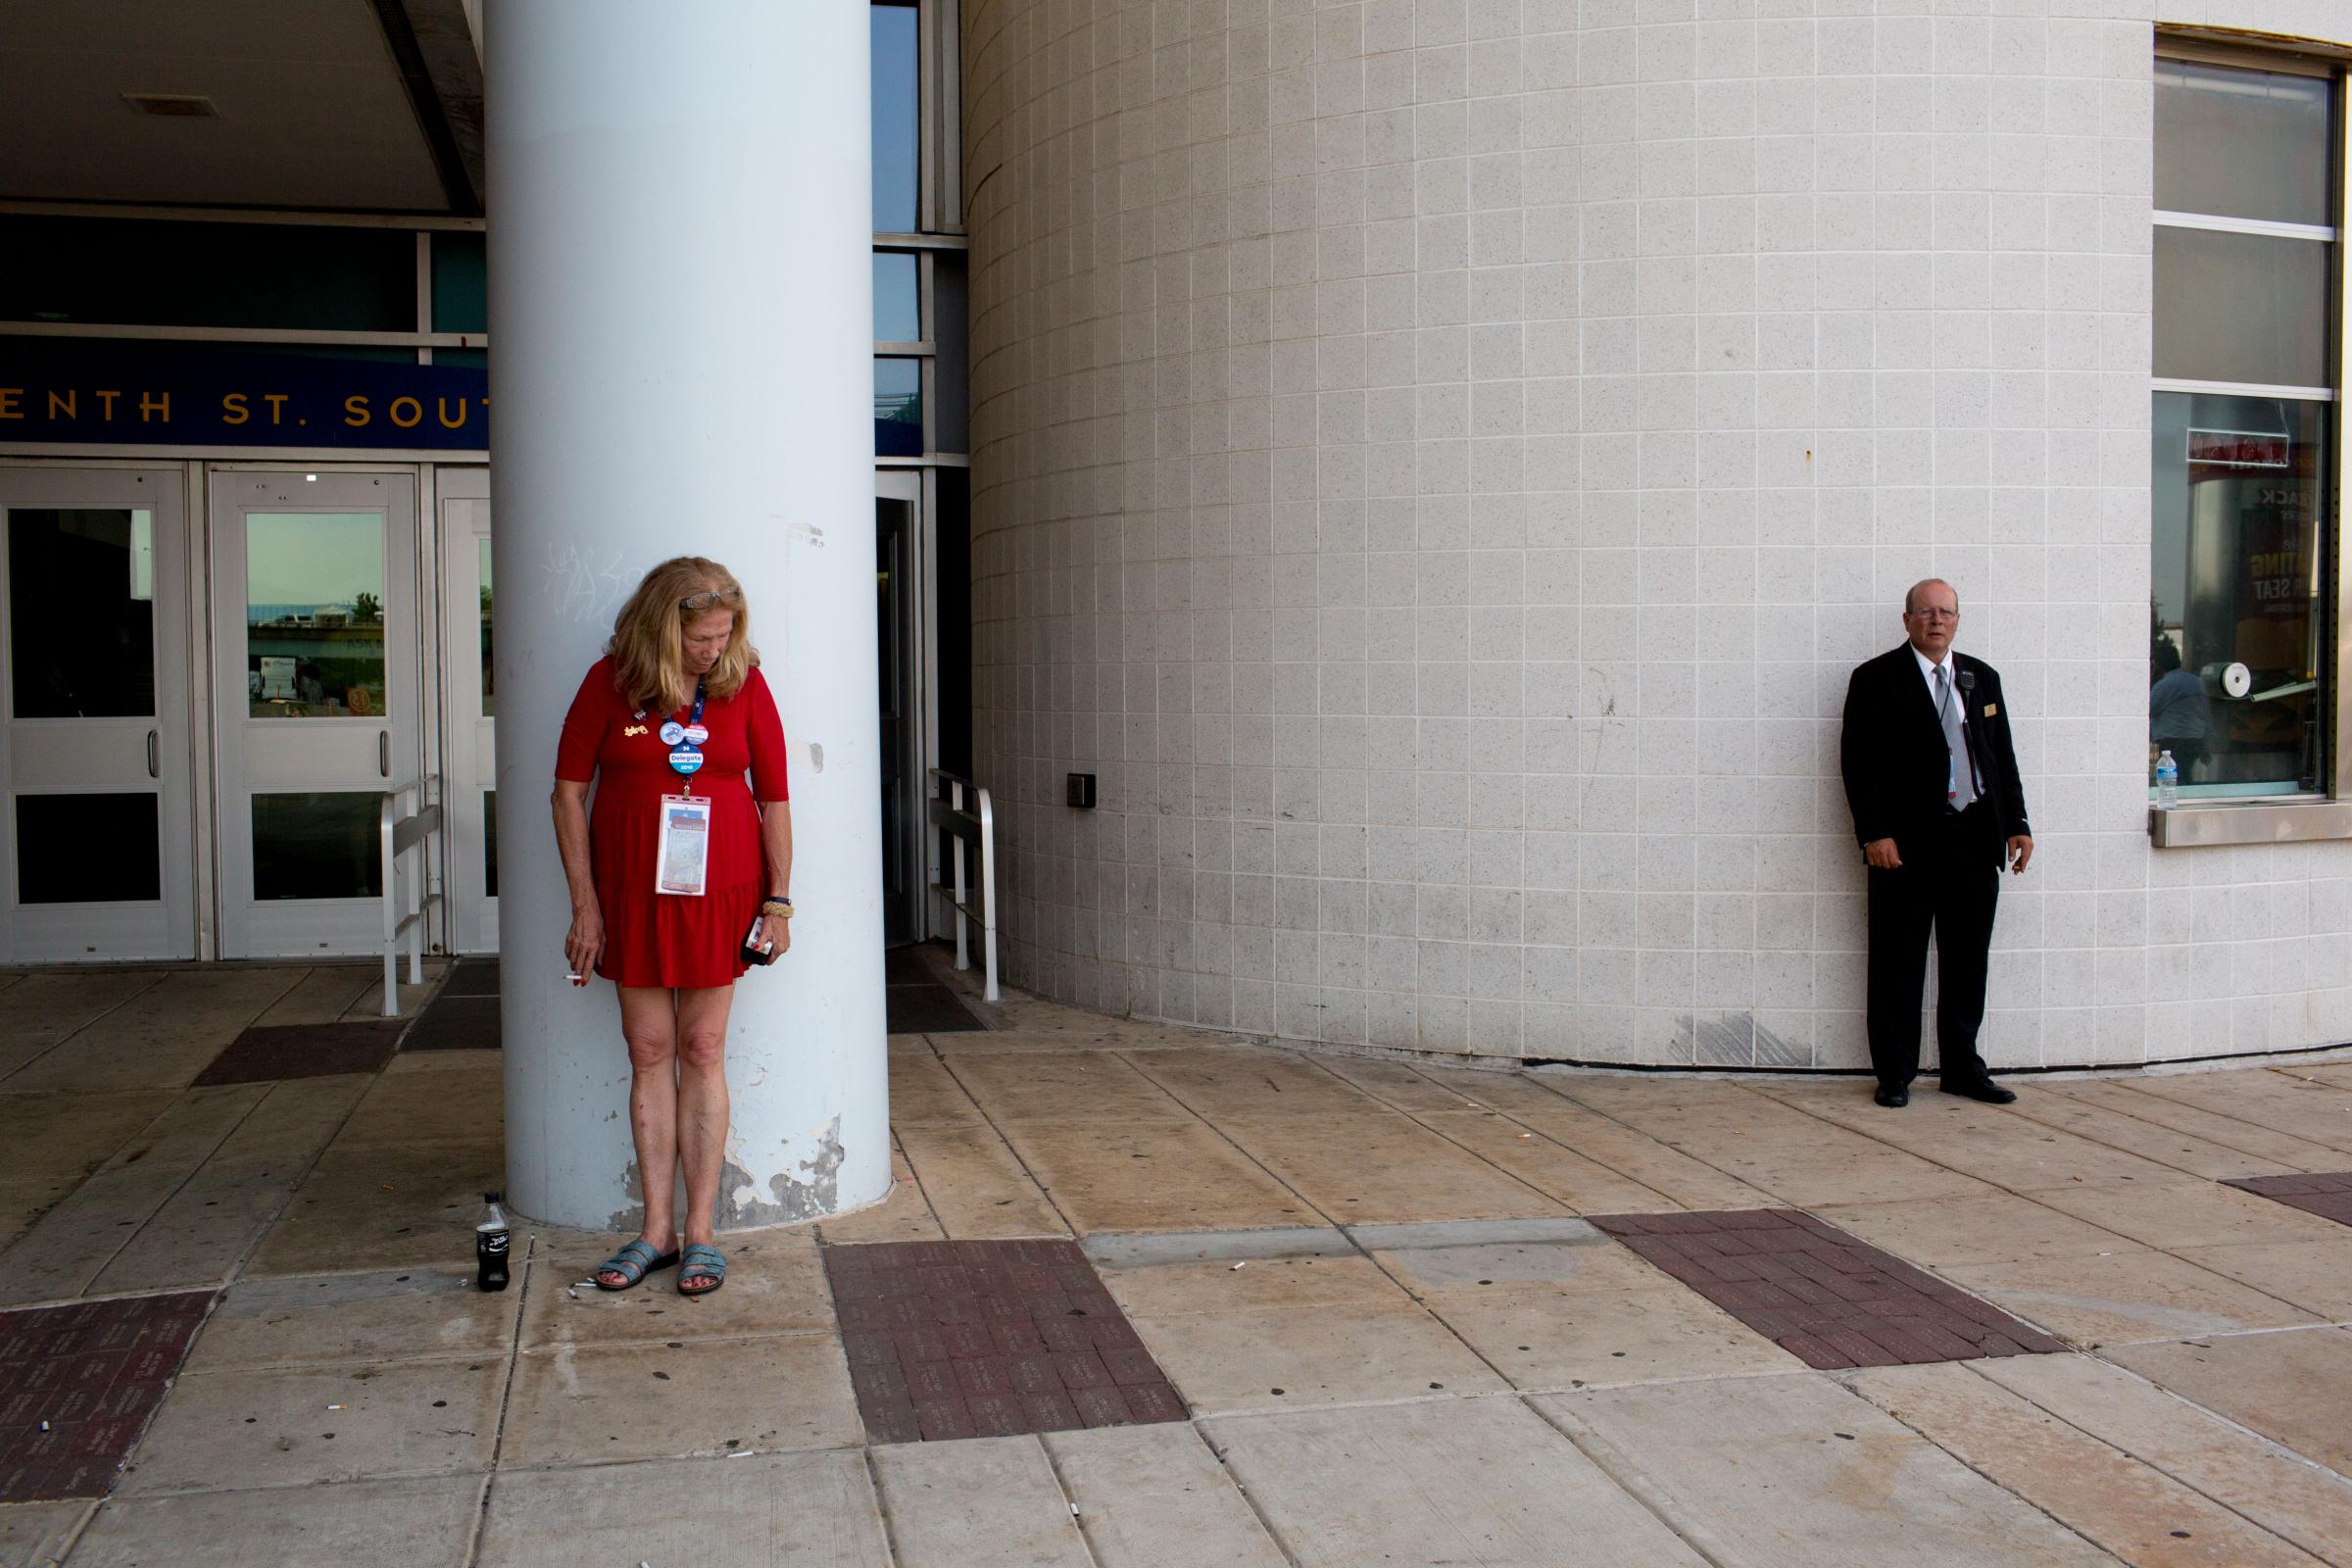 Press, Delegates and ticketed attendees converged at the Democratic National Convention at the Wells Fargo Center on July 27, 2016 in Philadelphia.